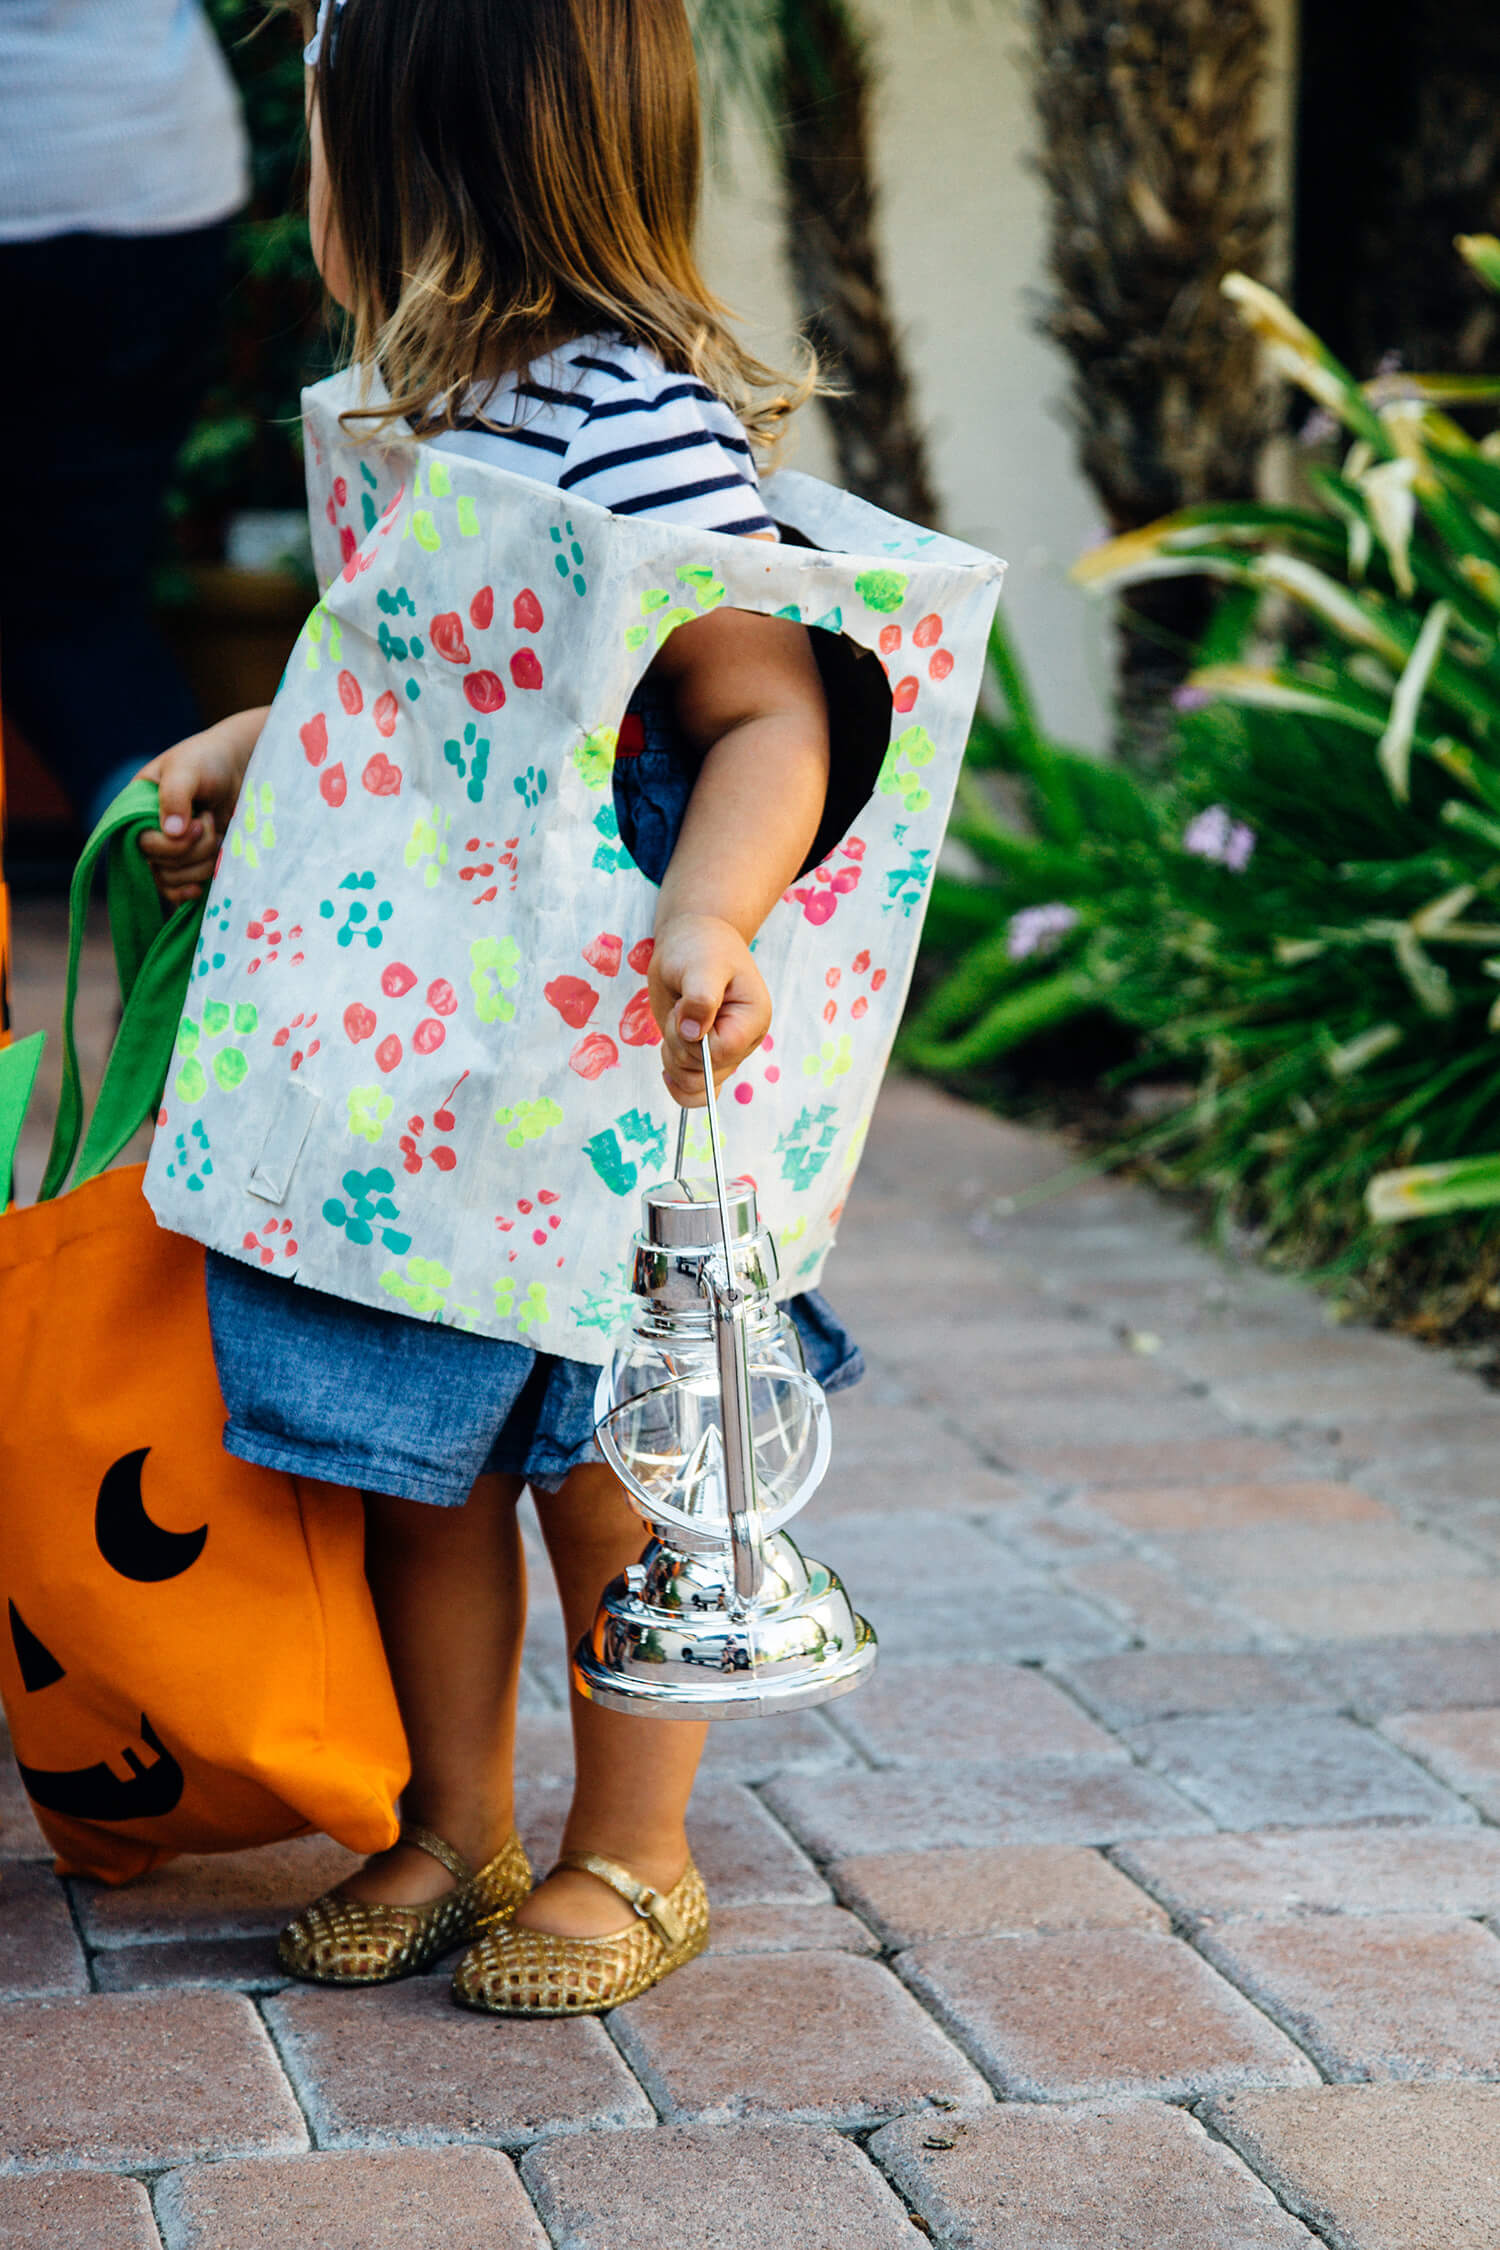 Halloween Paper Bag Costumes Idea For Kids - Utilizing Halloween Paper Bags for Creative Projects